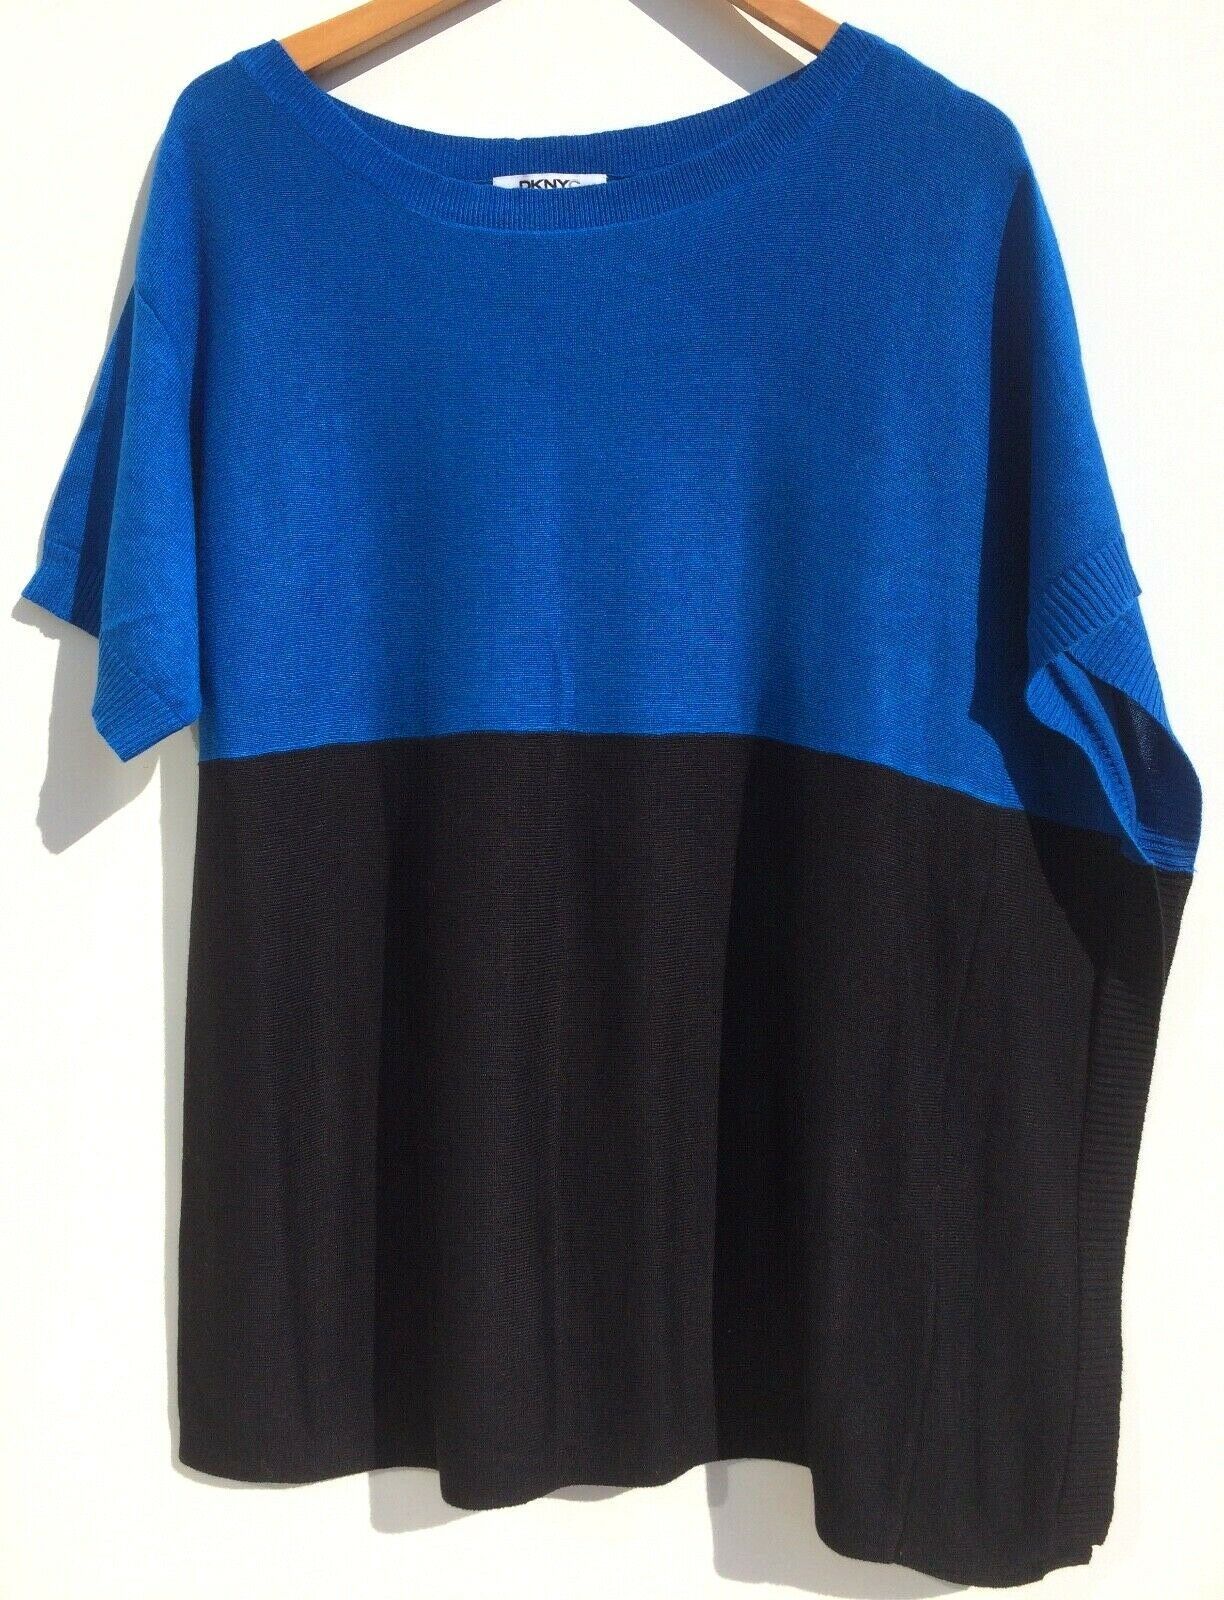 Primary image for DKNY DKNYC Poncho Size XS / S  Black and Bright Blue Asymmetrical Color Block 